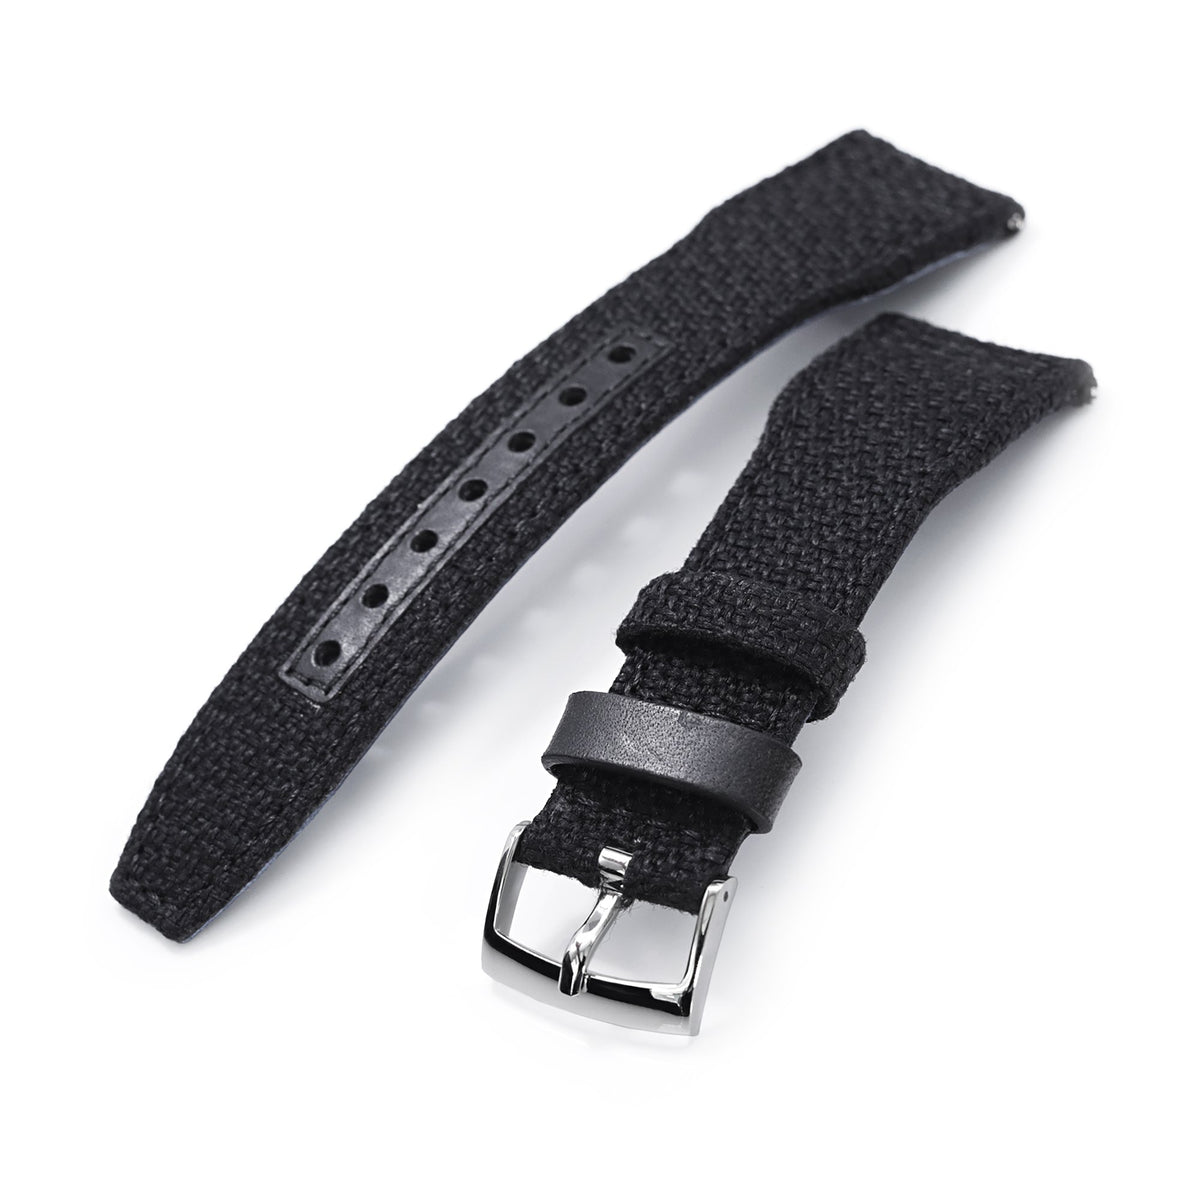 Q.R. Pilot watch strap 20mm or 22mm Revive Watch Band in BlackStrapcode Watch Bands